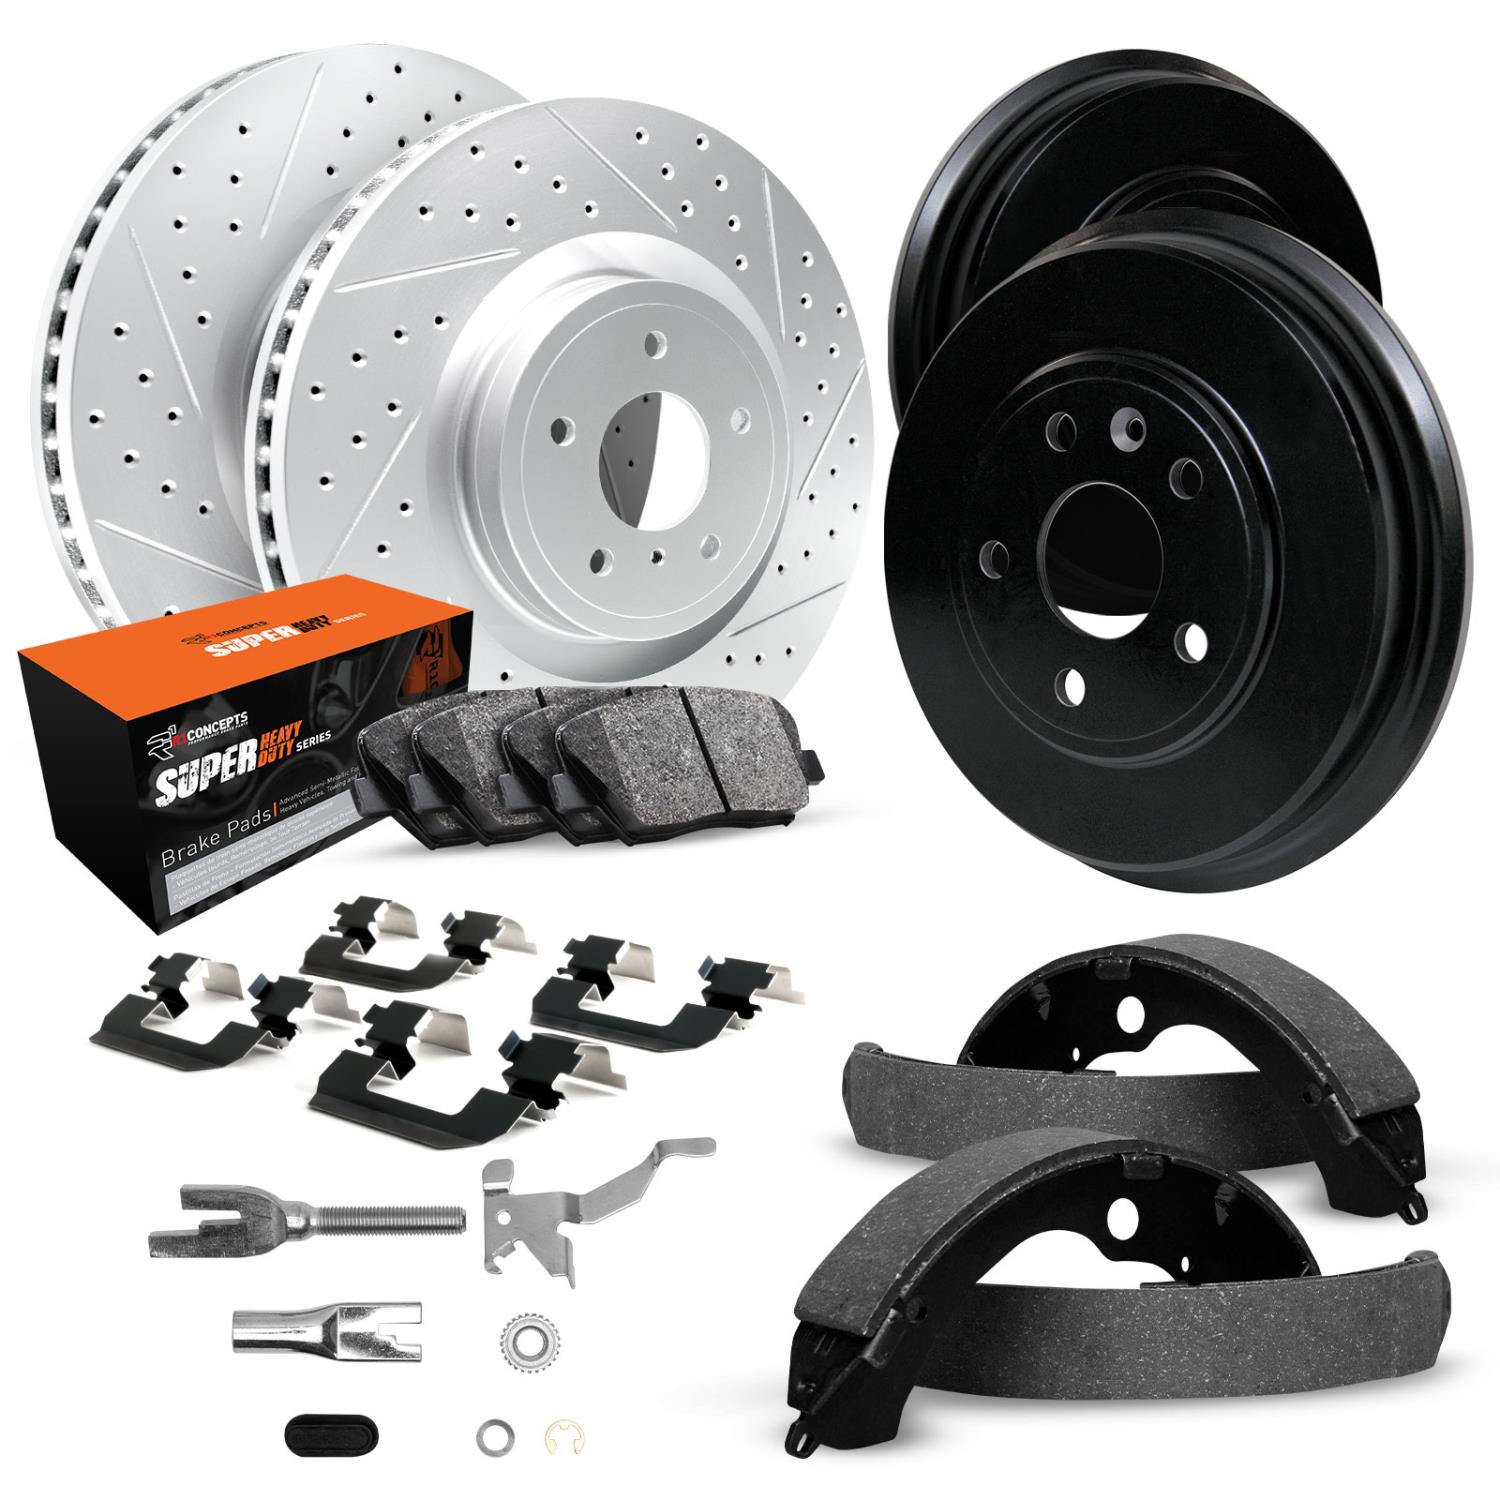 GEO-Carbon Drilled/Slotted Rotors/Drums w/Super-Duty Pads/Shoes/Hardware/Adjusters, 1991-1993 GM, Position: Front/Rear